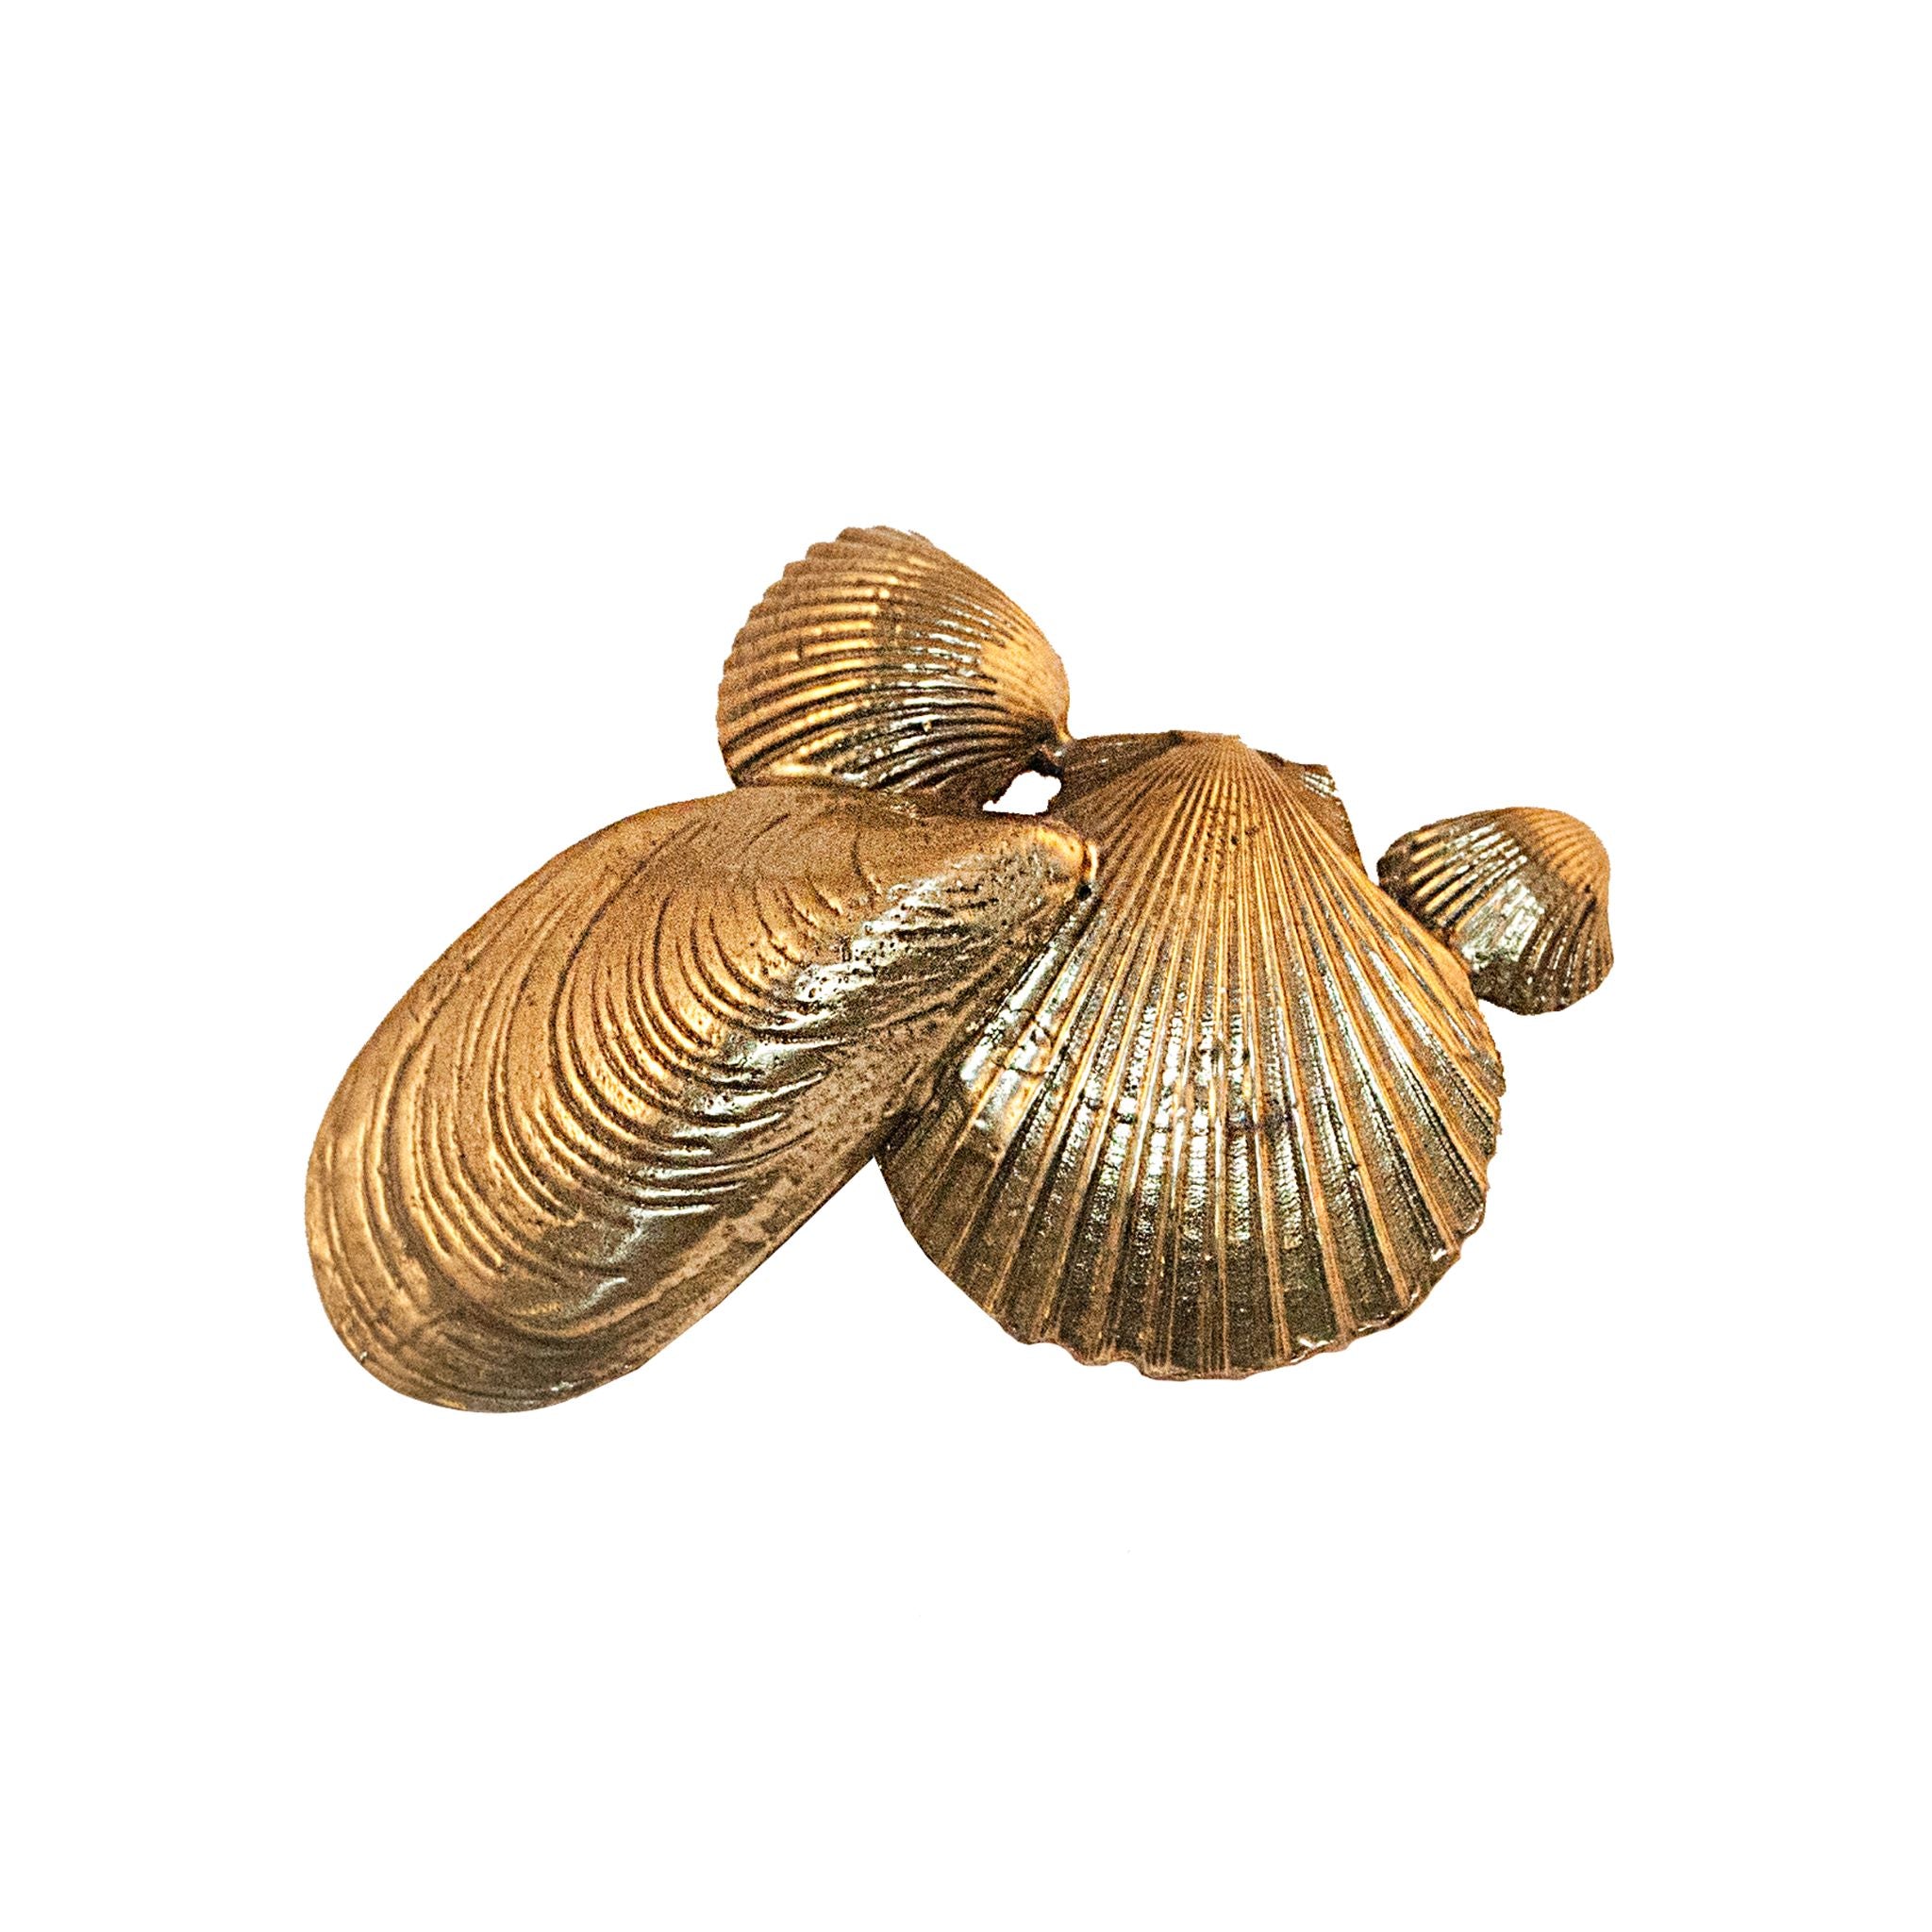 An image of a brass shell composition-shaped knob against a neutral background. The knob features intricately arranged shell designs, adding a touch of coastal elegance to furniture or drawers.